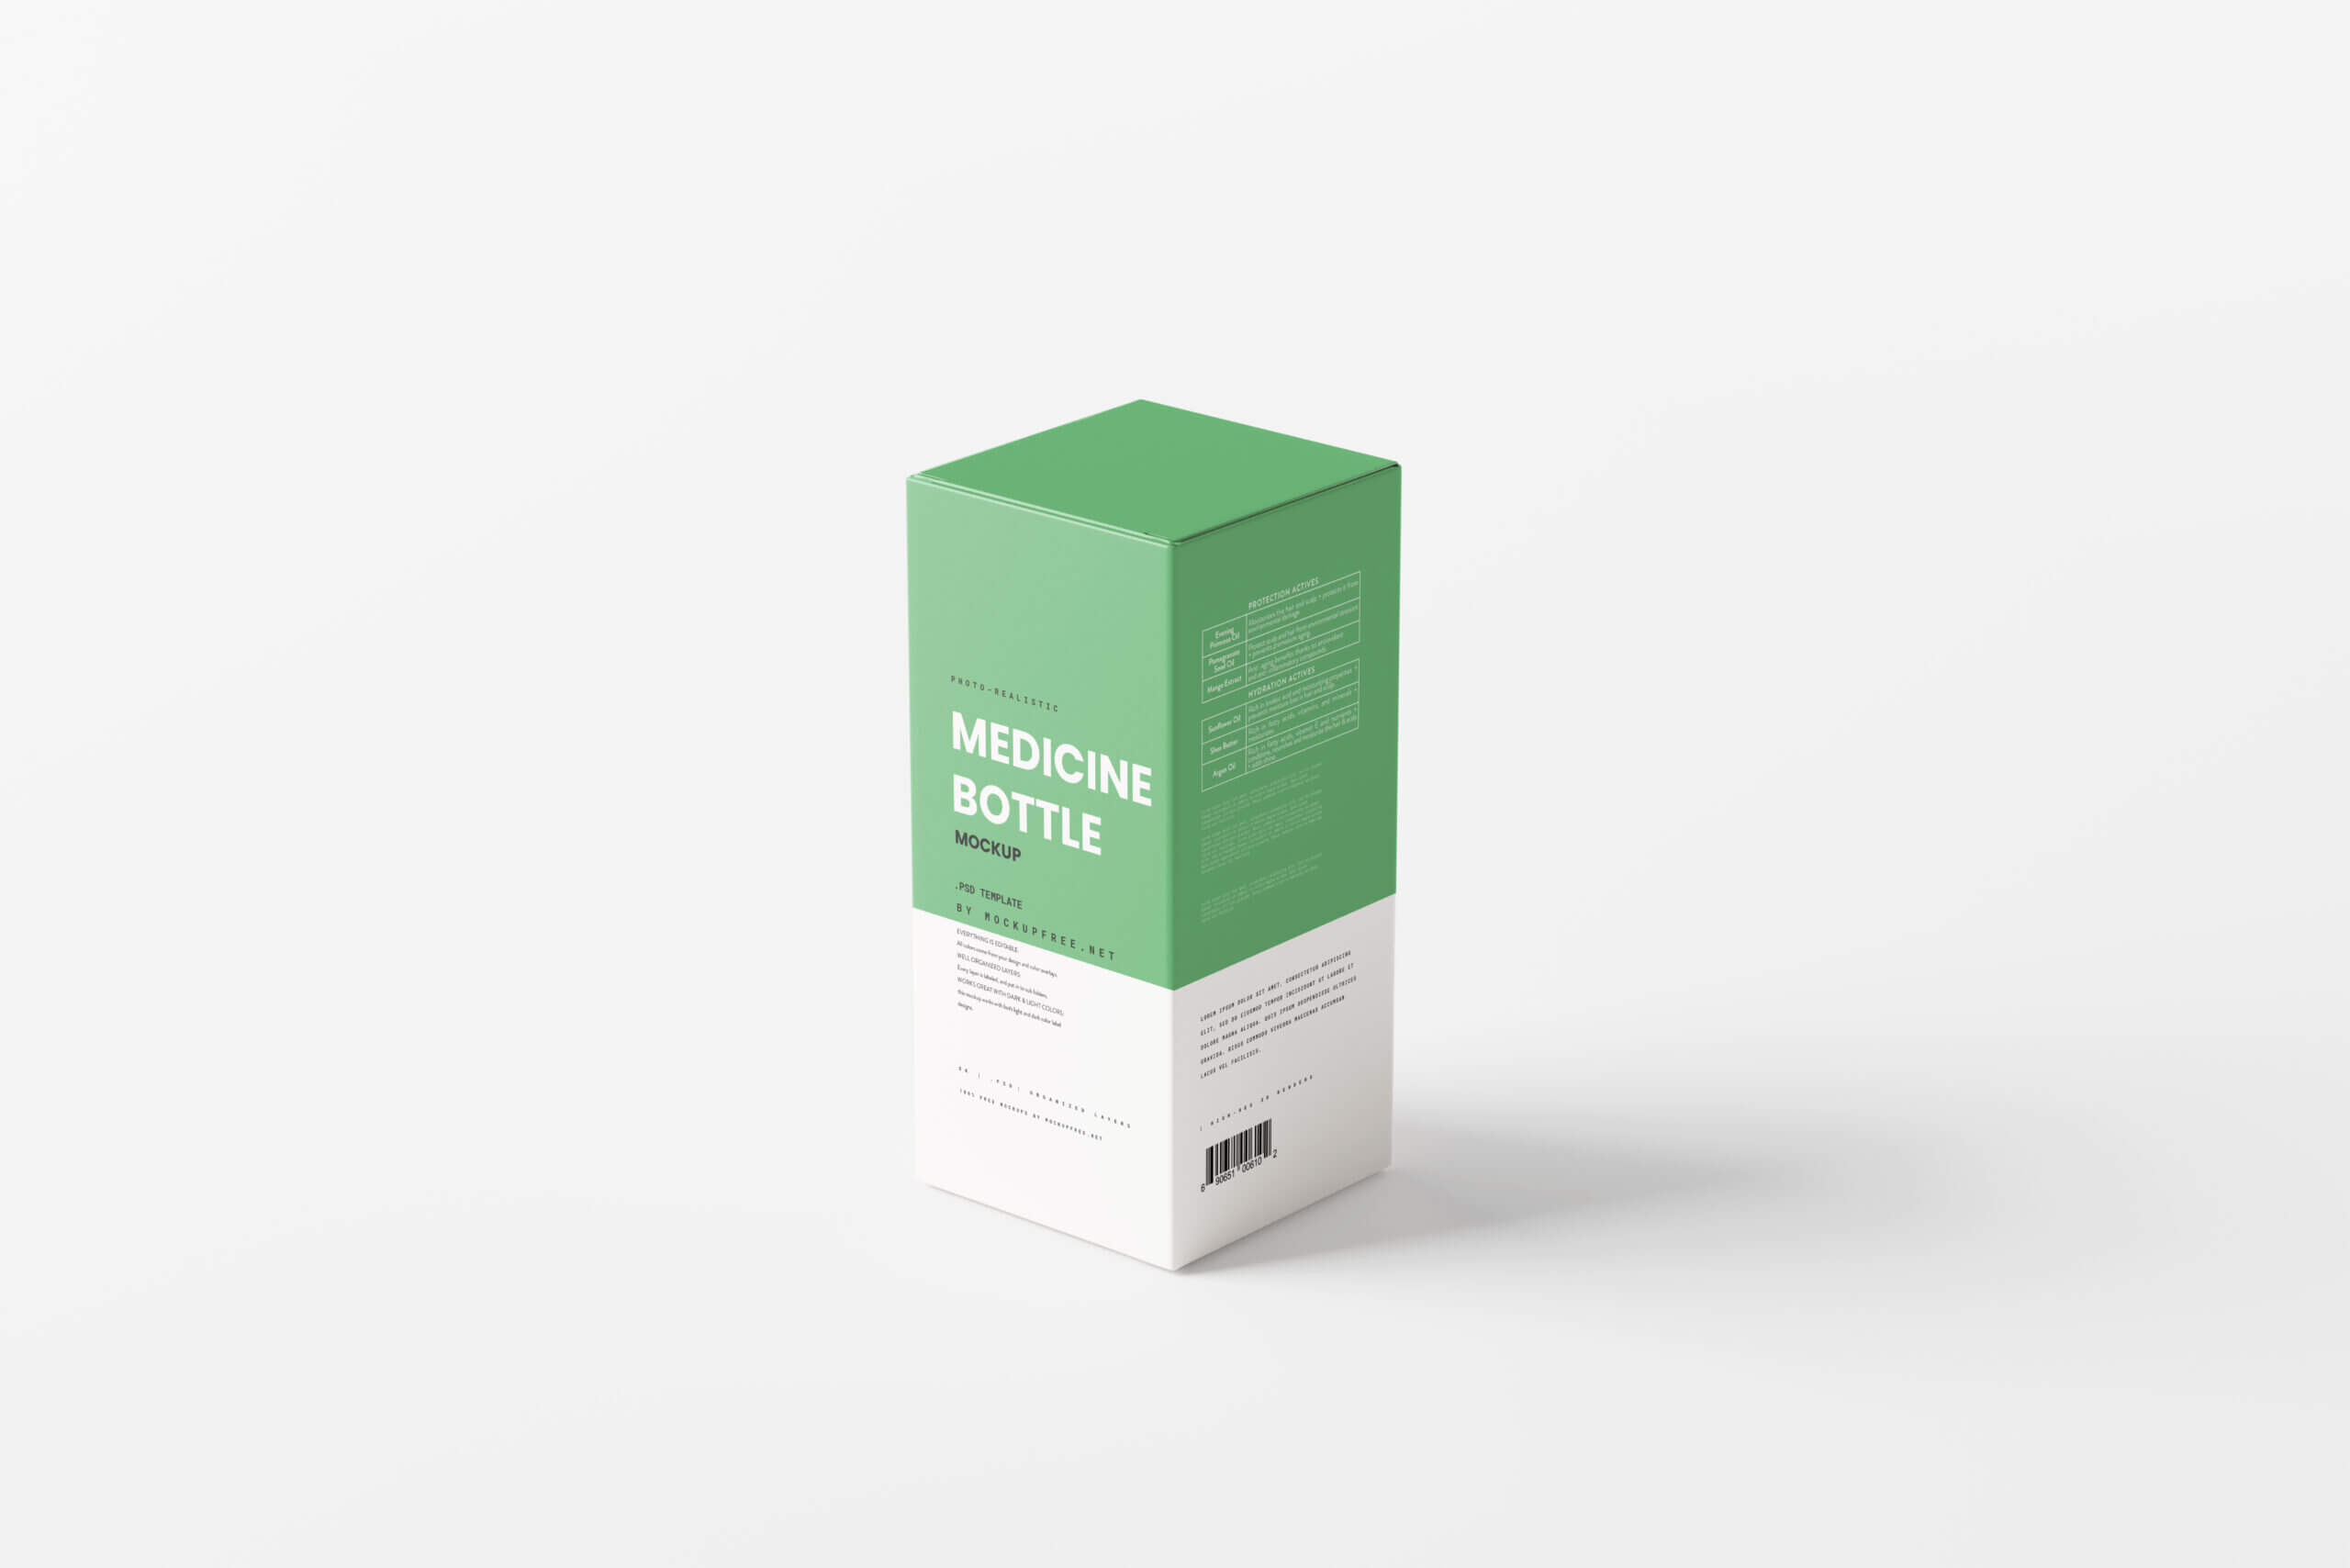 10 Free Amber Medicine Bottle With Box Mockup PSD Files4